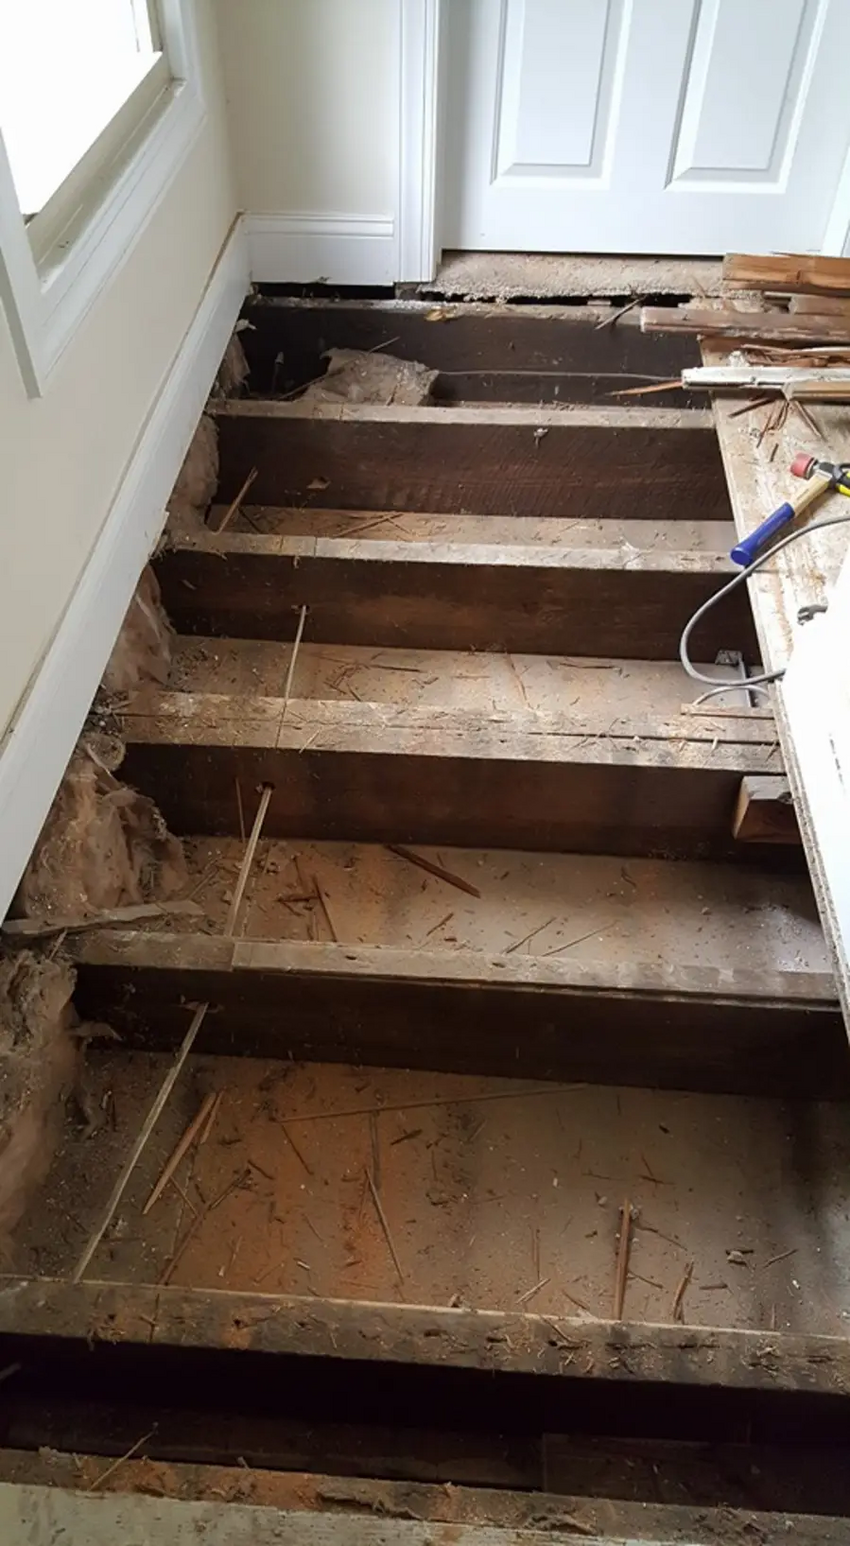 The hardwood being ripped up exposes the joists and stringers of the floor at the top of the stairs.